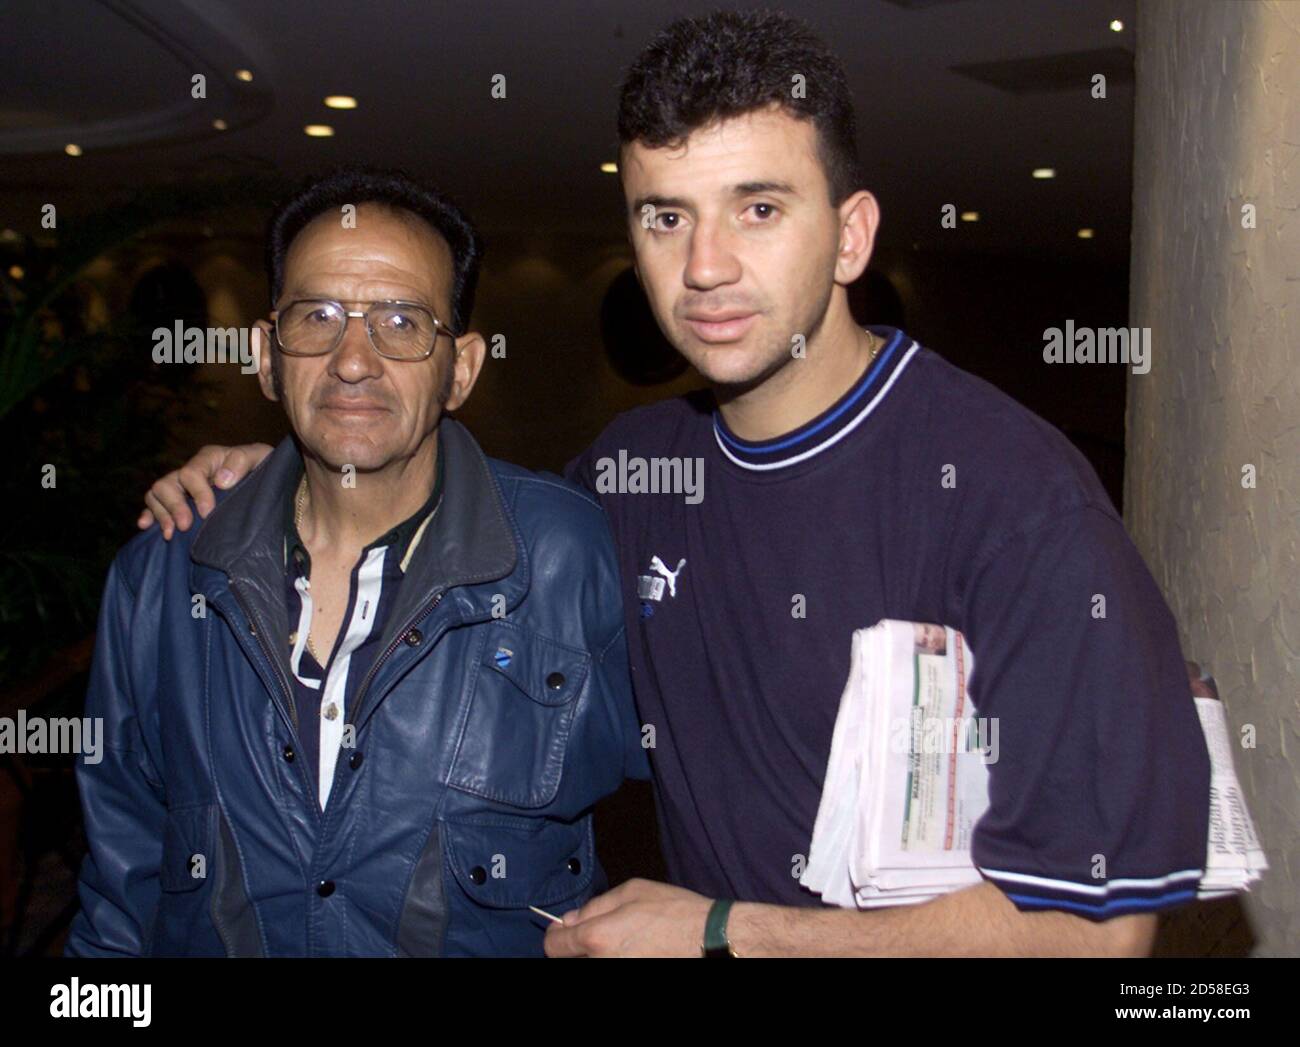 Bolivian player Julio Cesar Valdivieso (R) of club Bolivar de la Paz and  his father Enrique Valdivieso Hernadez pose as they arrive at the Hotel  Melia in Mexico City, May 16. Bolivar